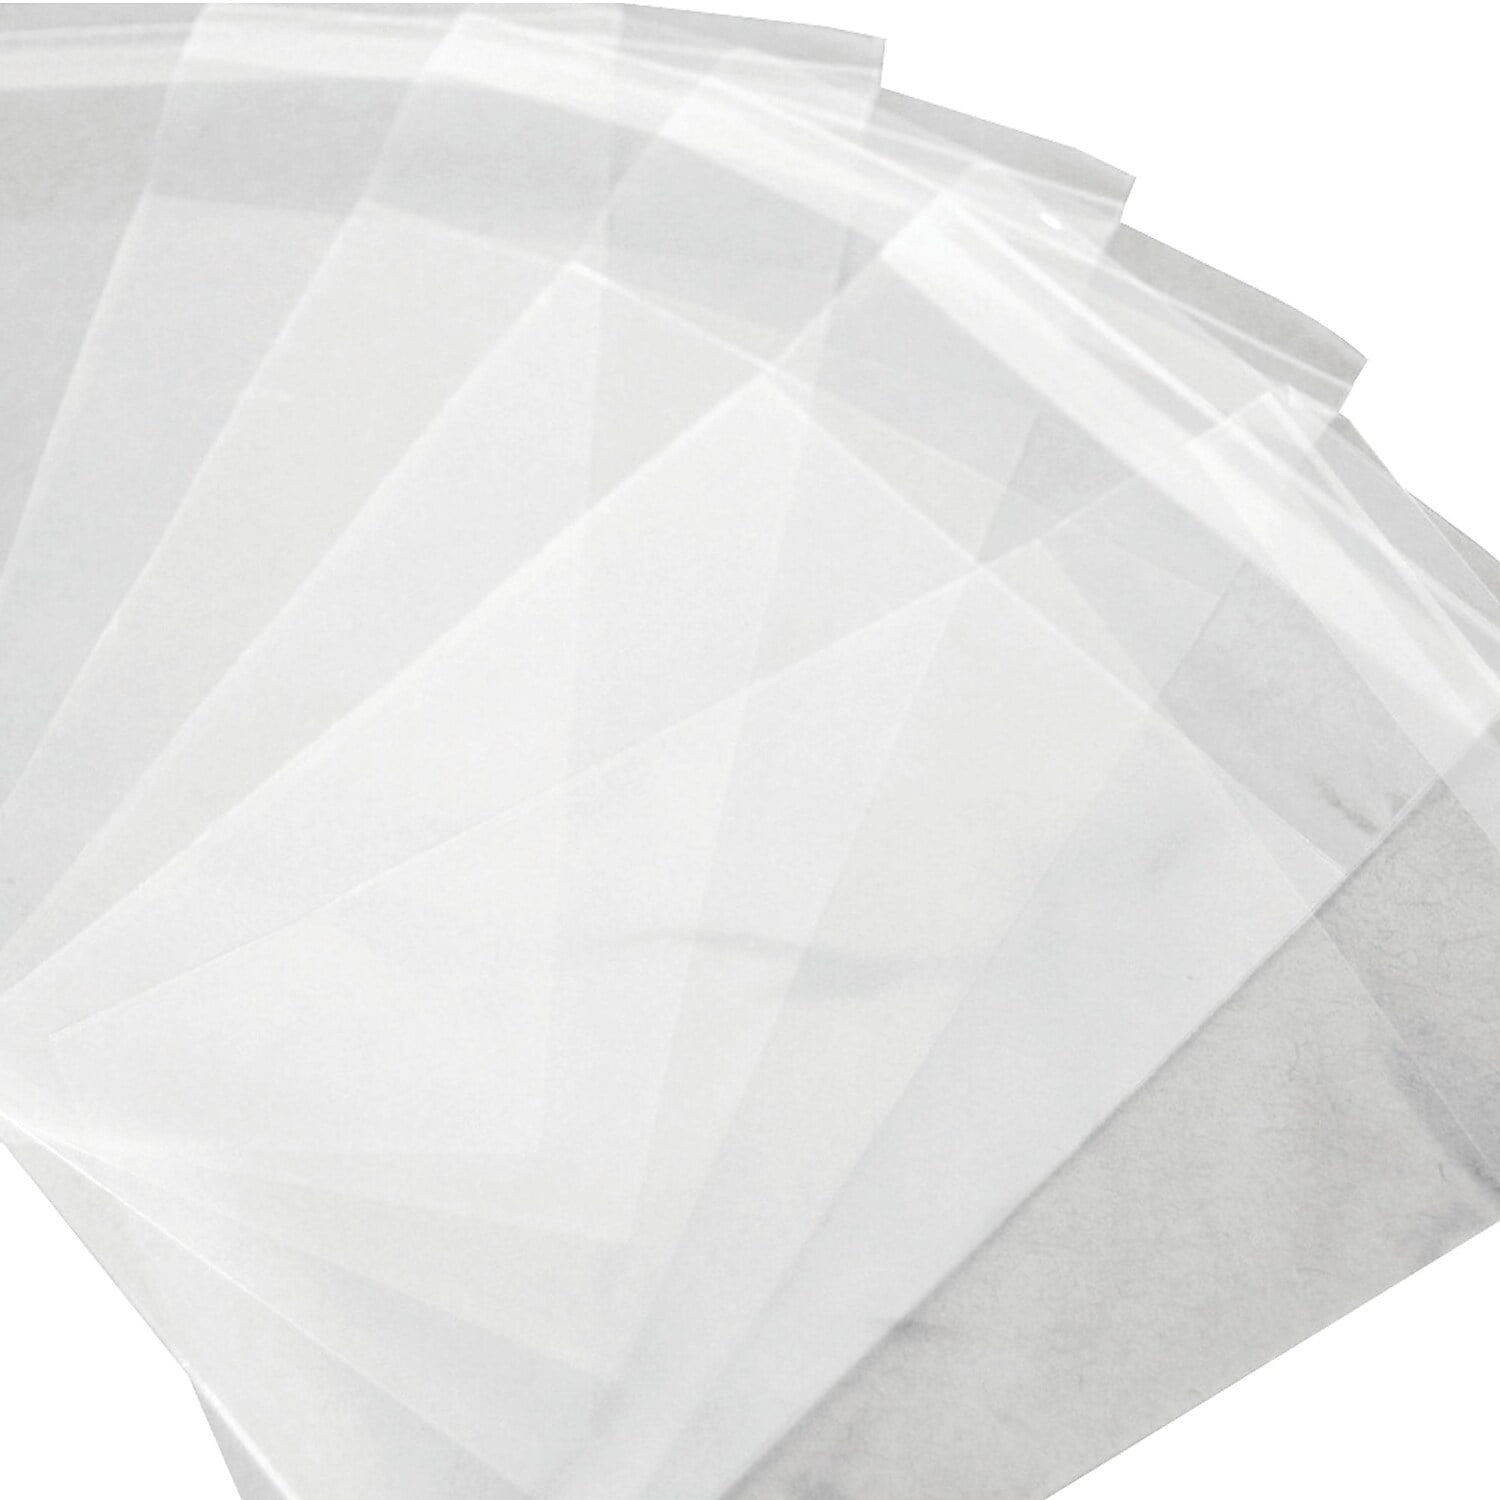 Pbr119 6 X 9 In. 1.5 Mil Resealable Polypropylene Bags Case, Pack Of 1000